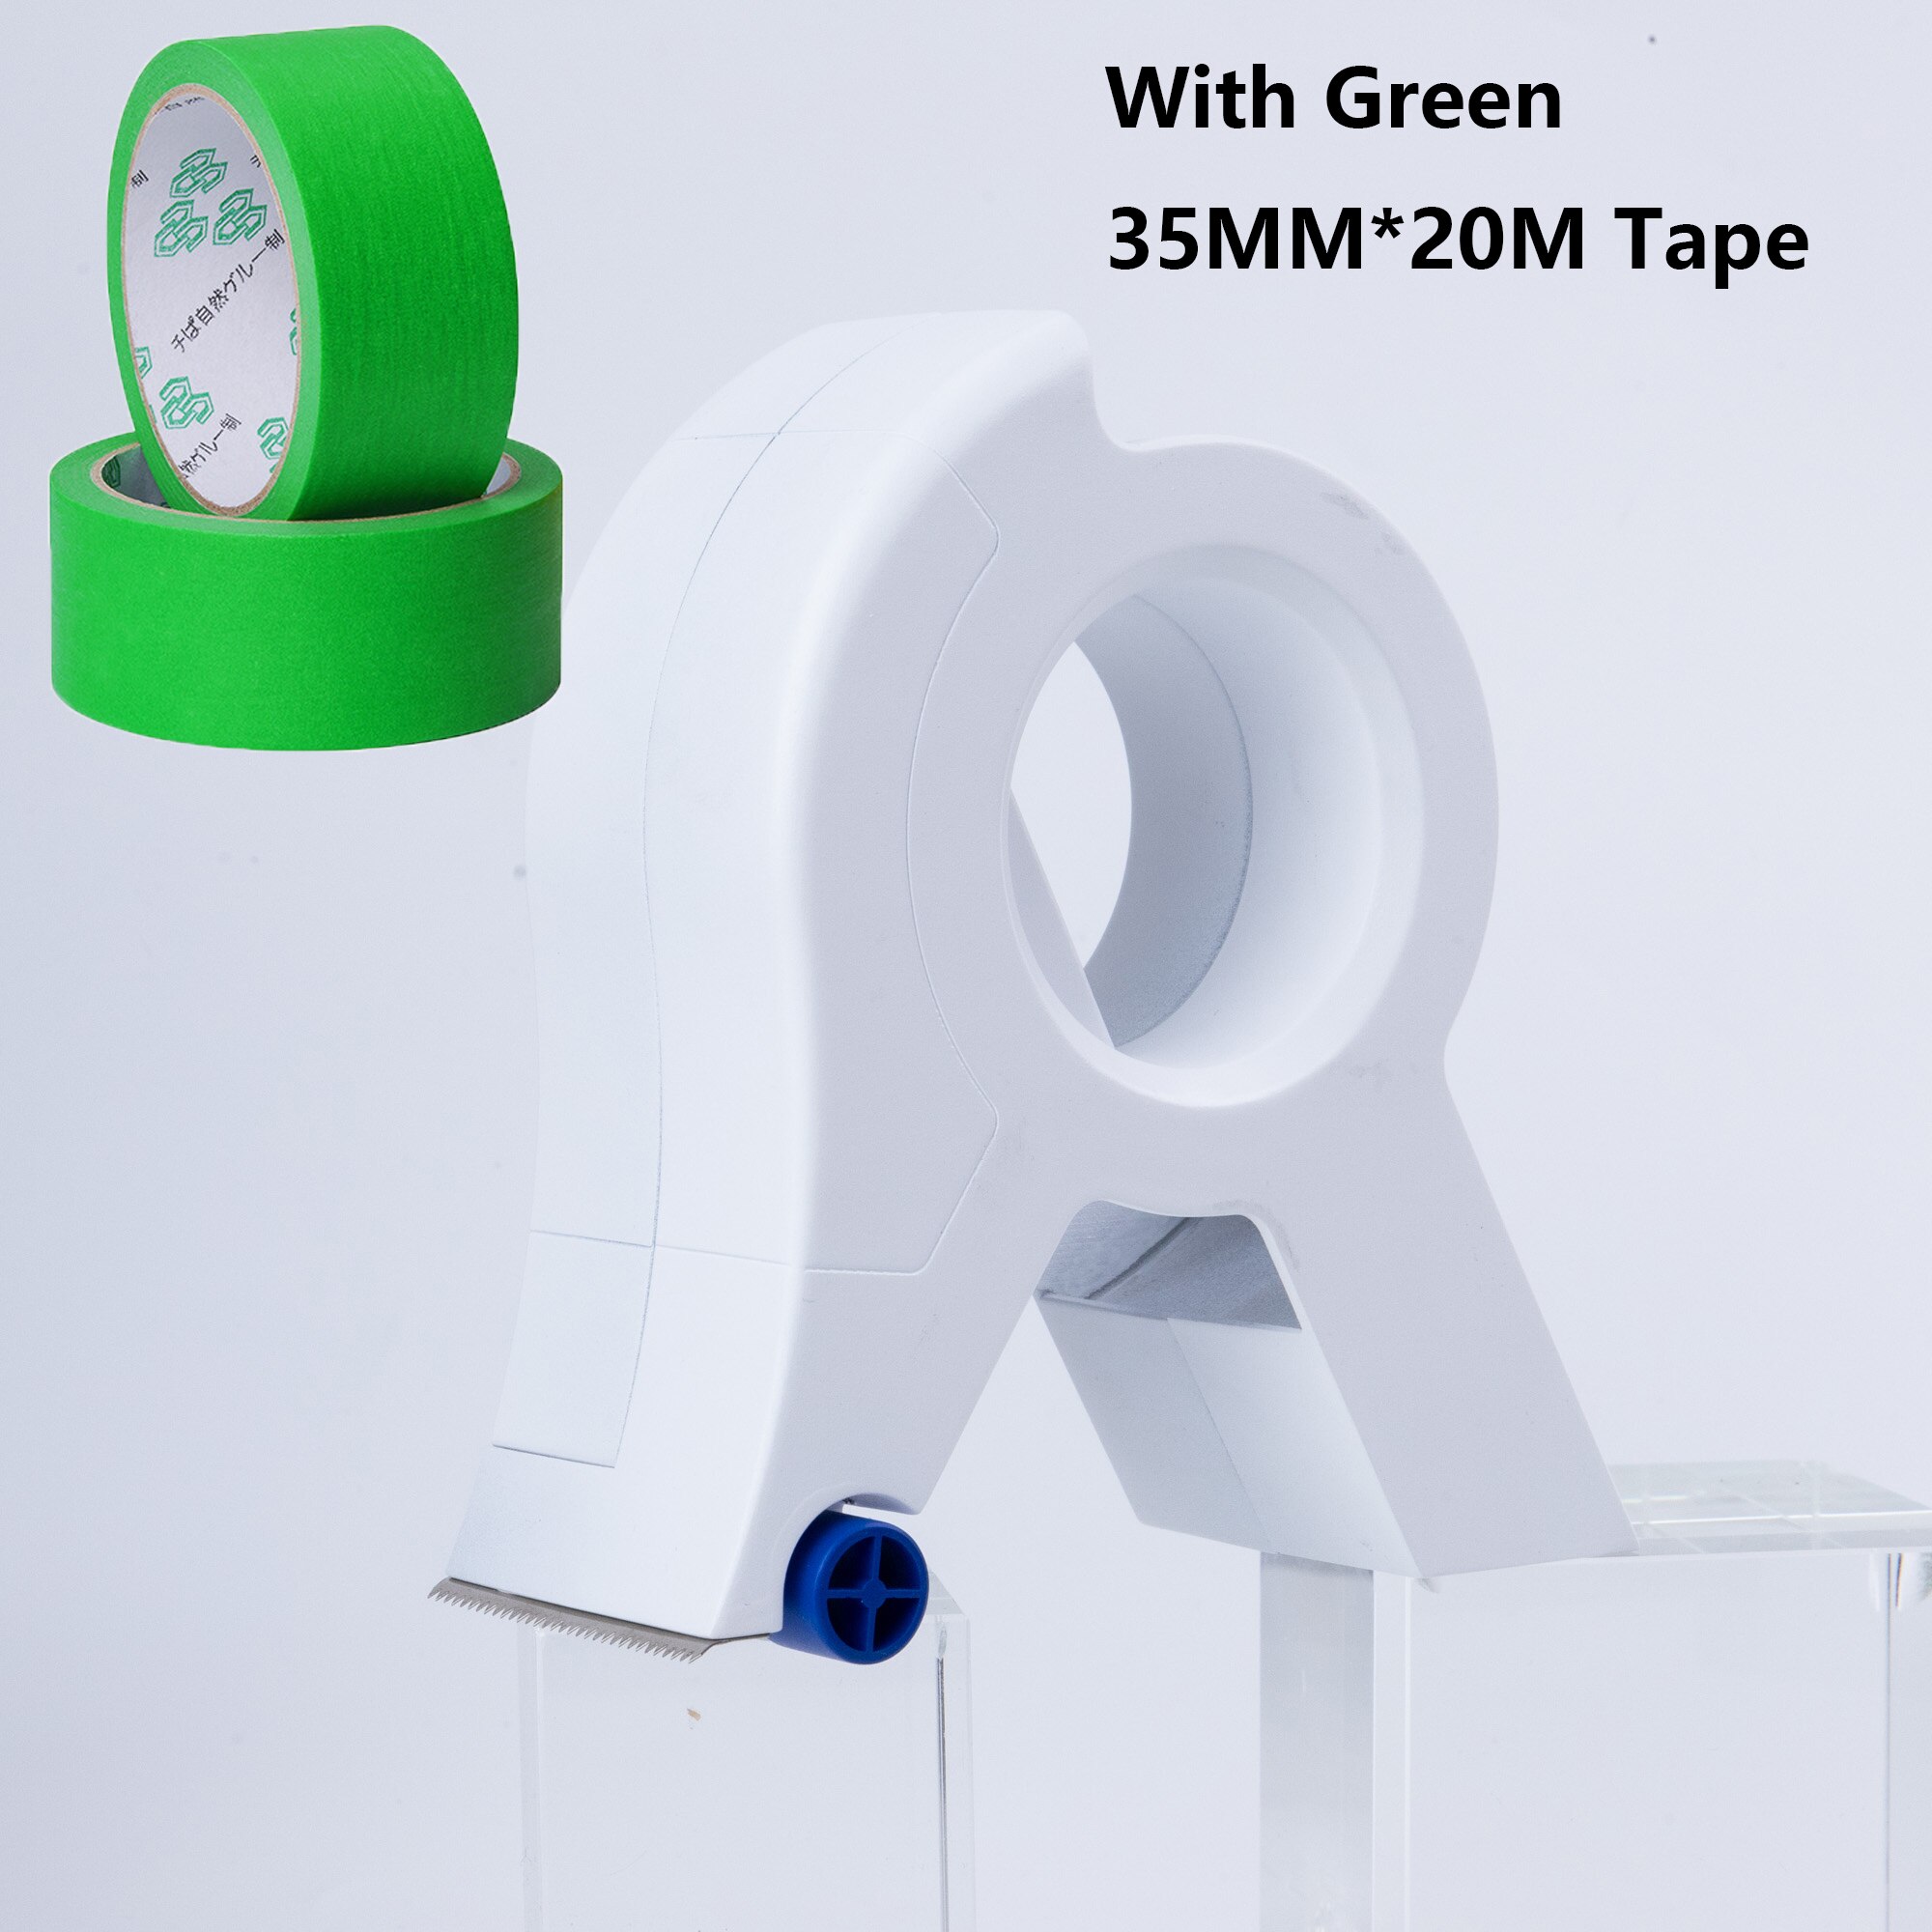 Painter Masking Tape Applicator Dispenser Machine Wall Floor Painting Packaging Sealing Pack Tape Tool Fit Tape 50mm Wide Max.: With A Green Tape